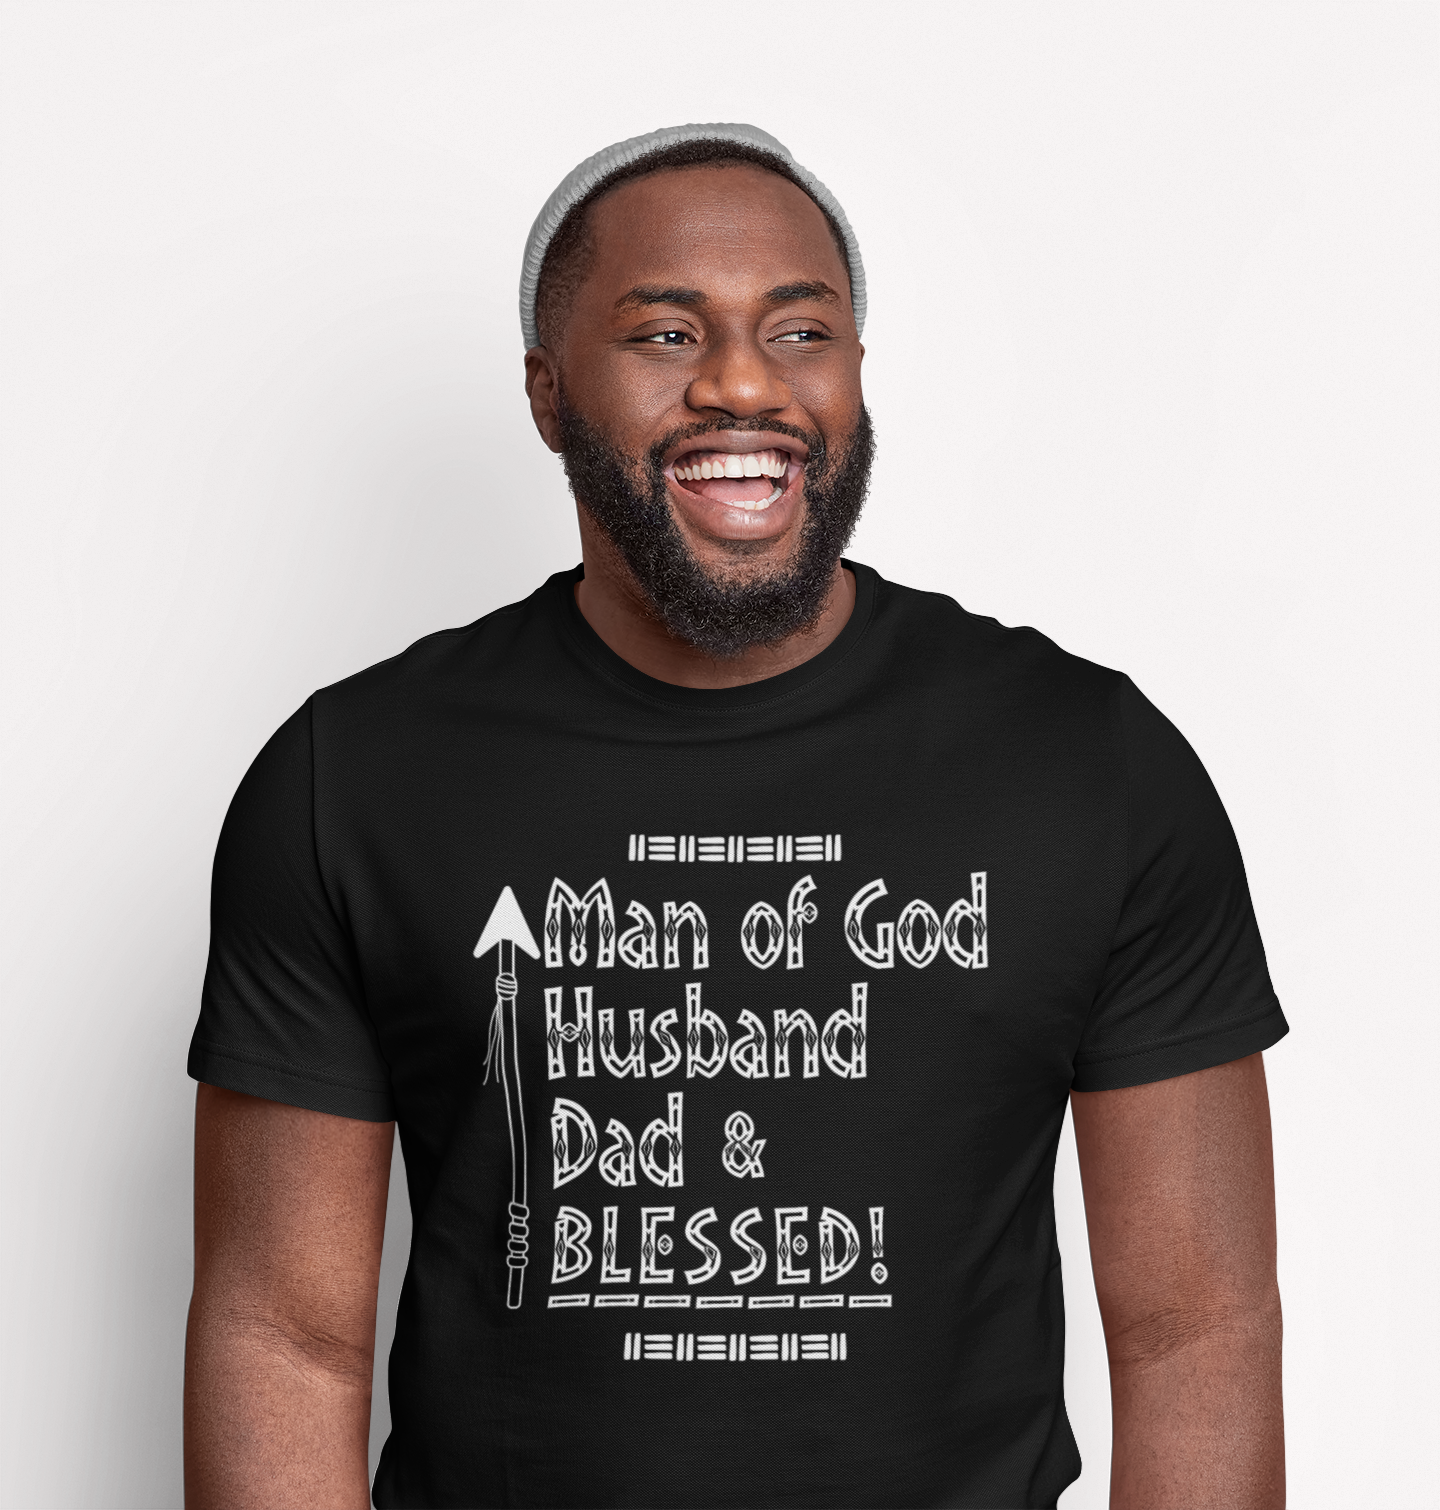 Man of God Husband Dad & Blessed Men's Father's Day Christian Faith T-Shirt